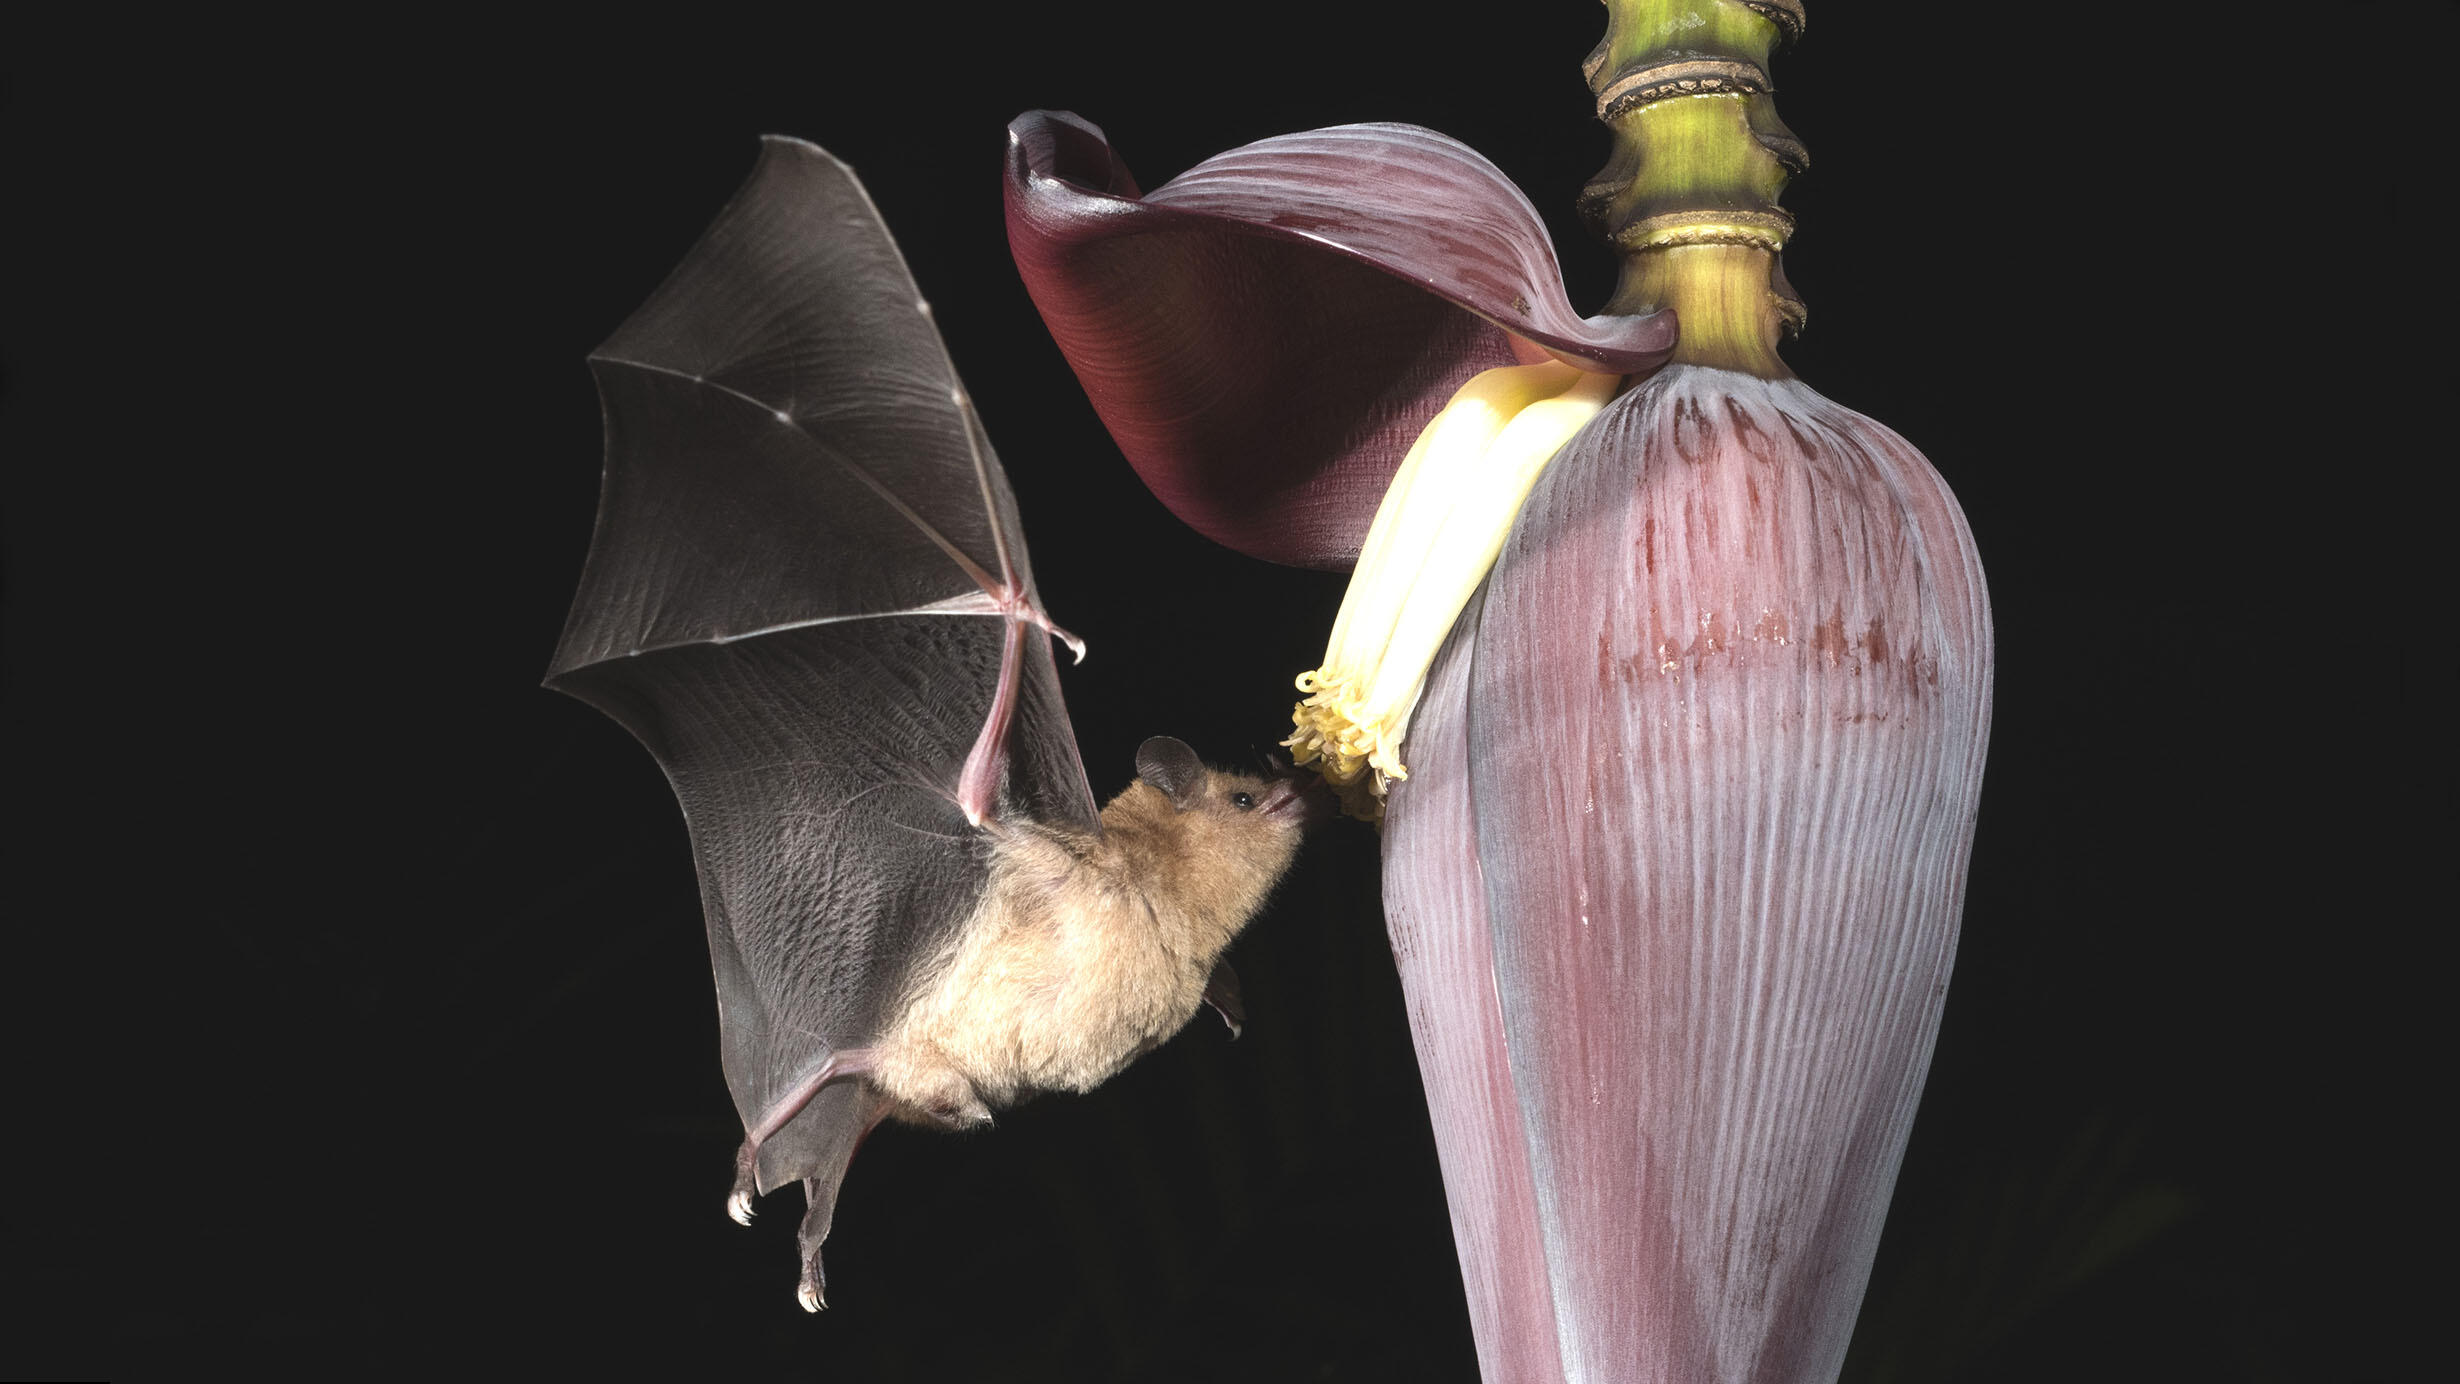 Bat hovers in the air next to a banana flower, feeding on its nectar.